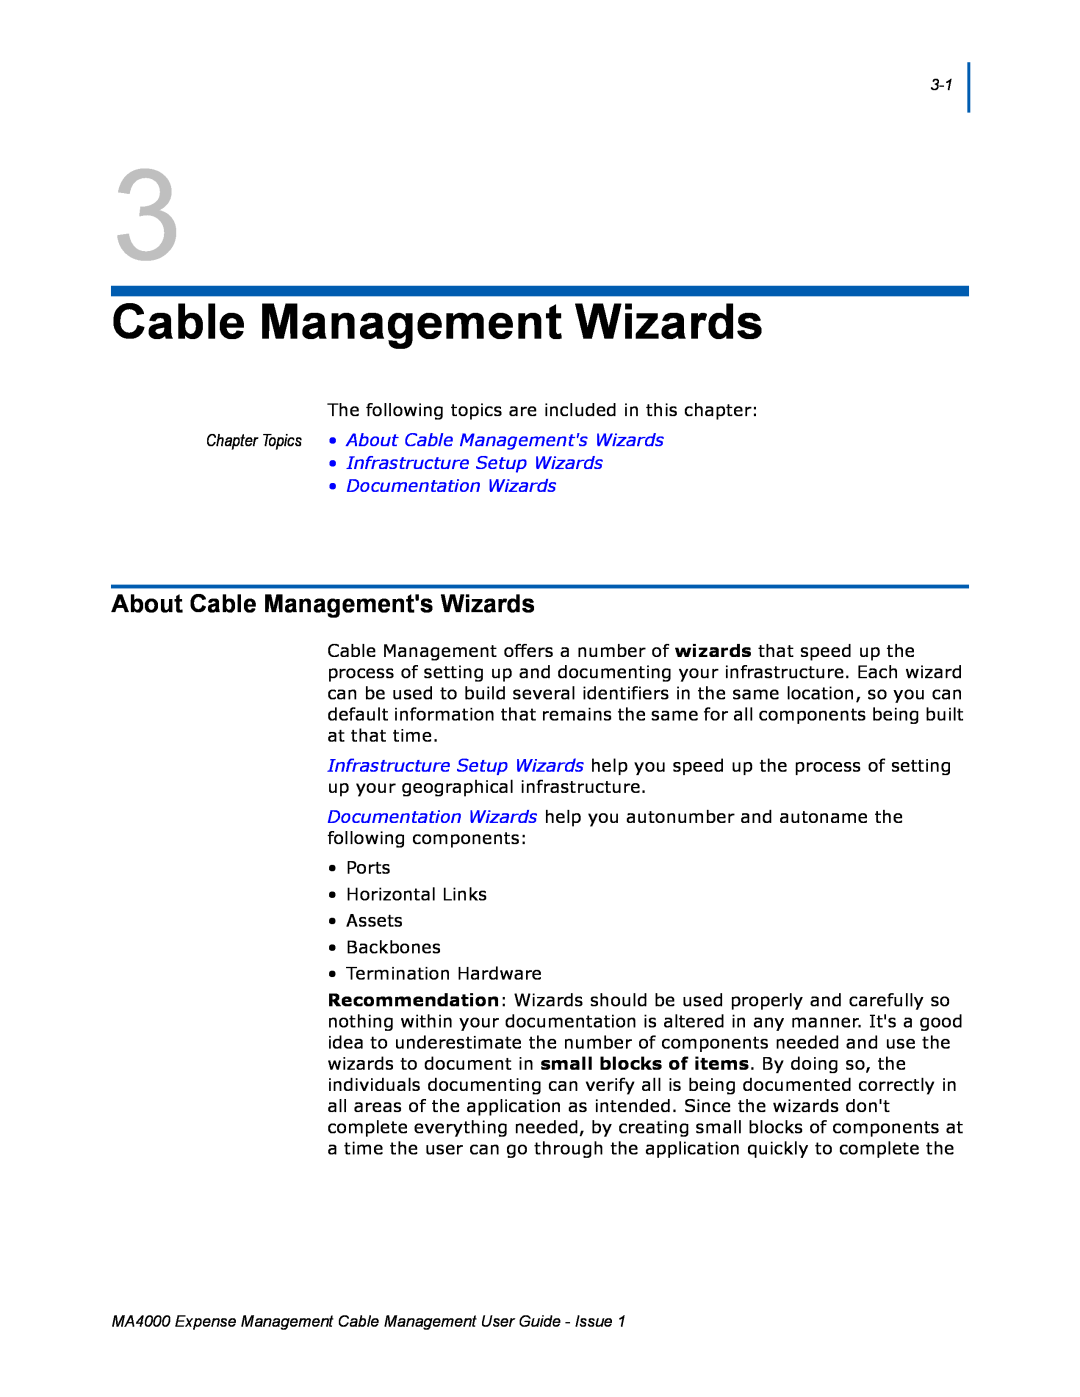 NEC MA4000 manual Cable Management Wizards, About Cable Managements Wizards 